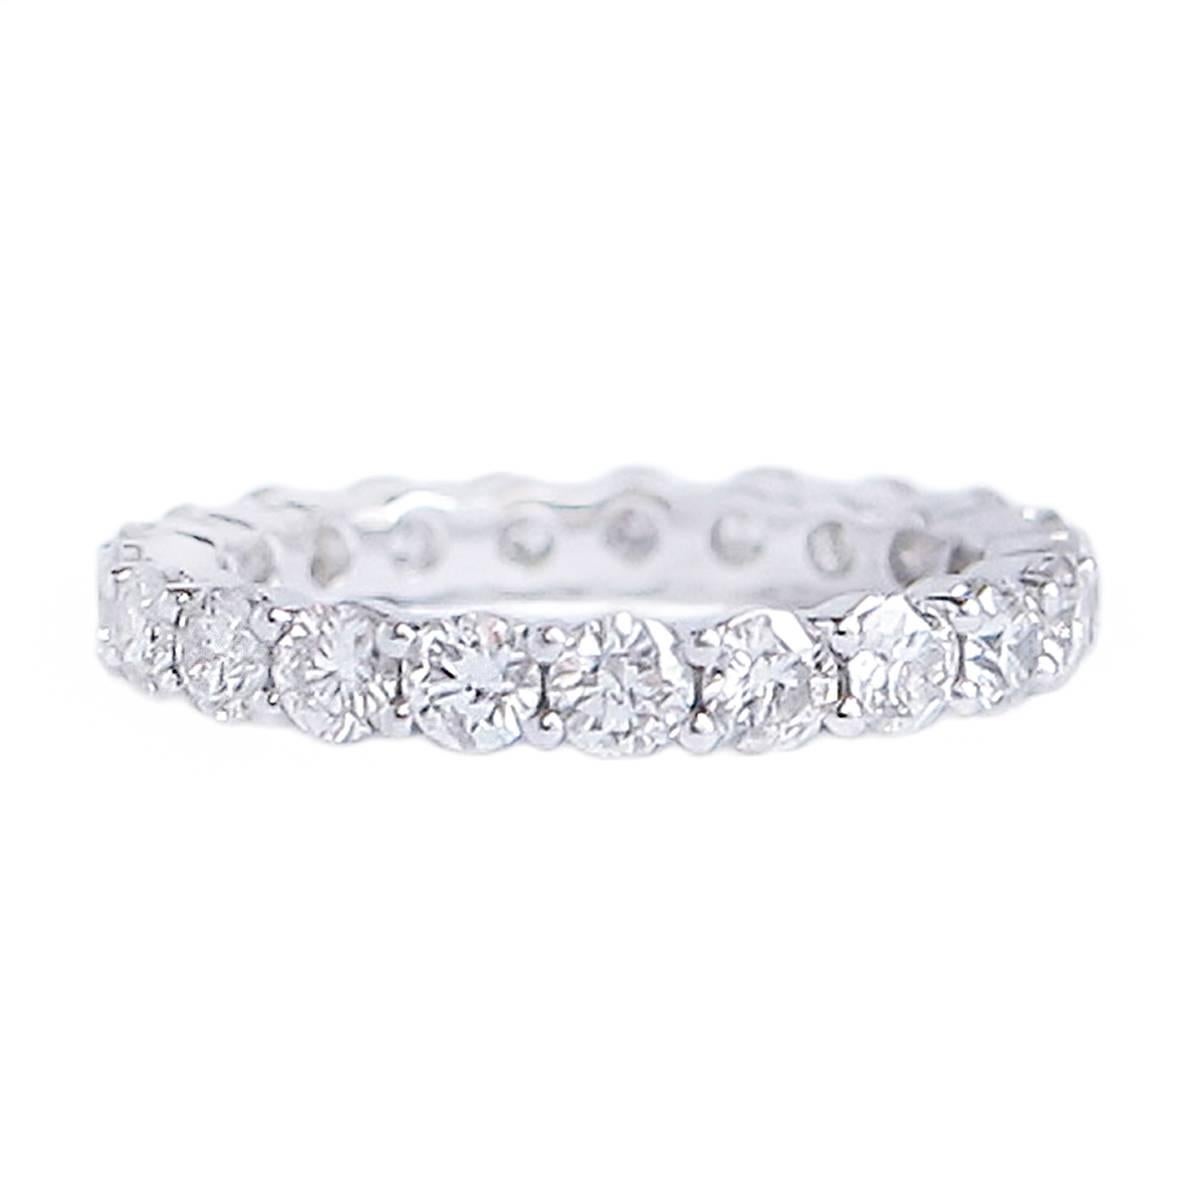 This classic 2.31 Carat Diamond Eternity Band is set in 18 Karat white gold. 

The twenty-one G-H Color clear Diamonds are round, Brilliant Cut and hand set in the shared claw fashion. It measures 4.8 mm across and is an American size 7. (Full gem